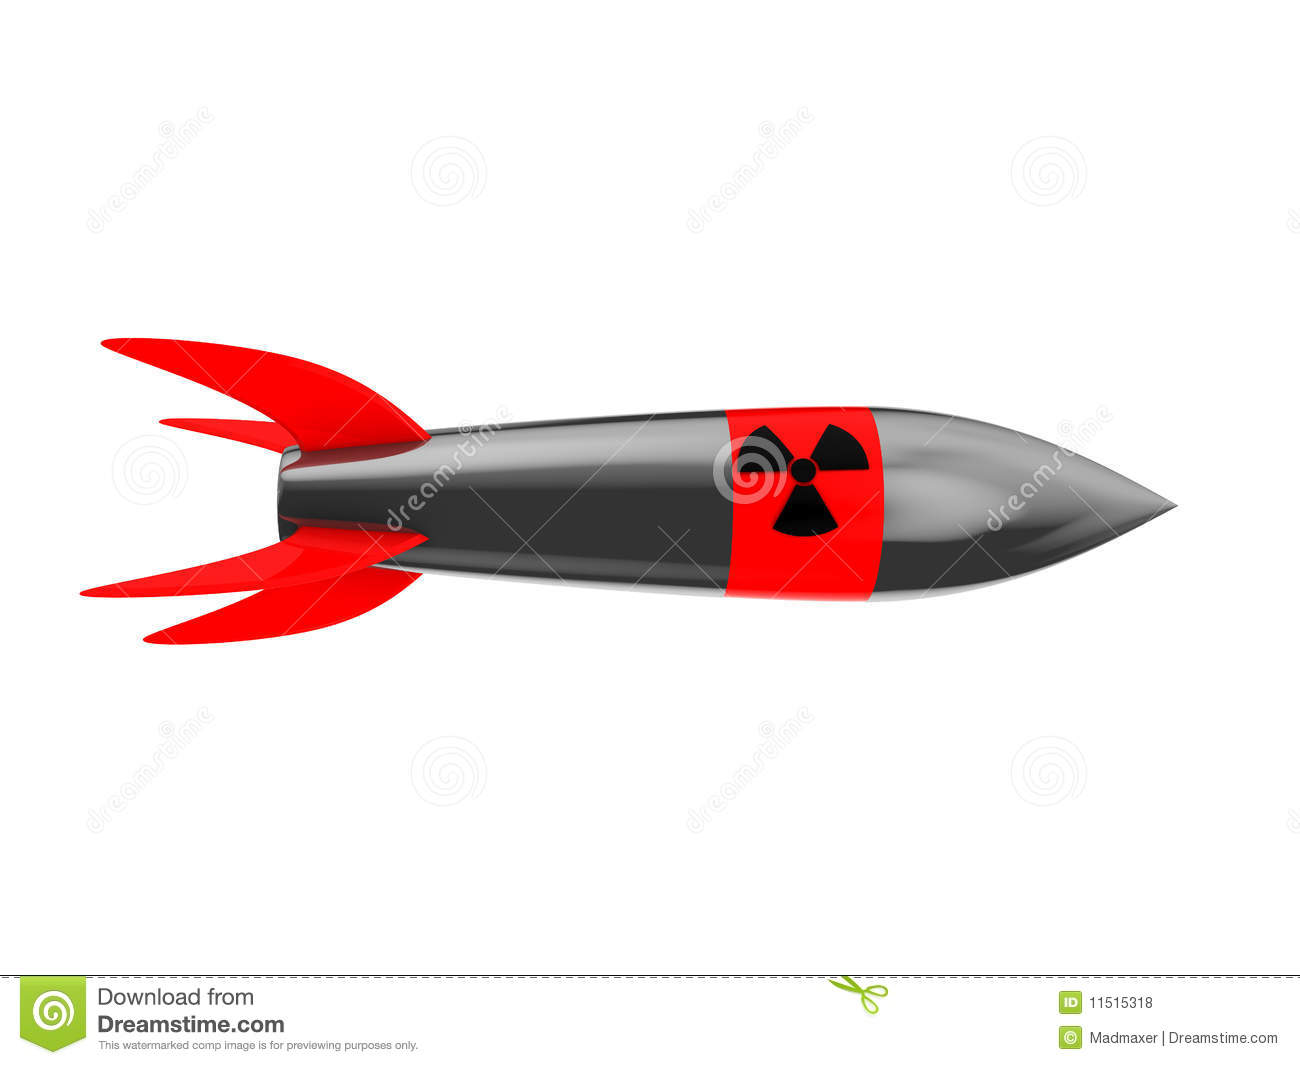 3d Illustration Of Nuclear Missile Isolated Over White Background